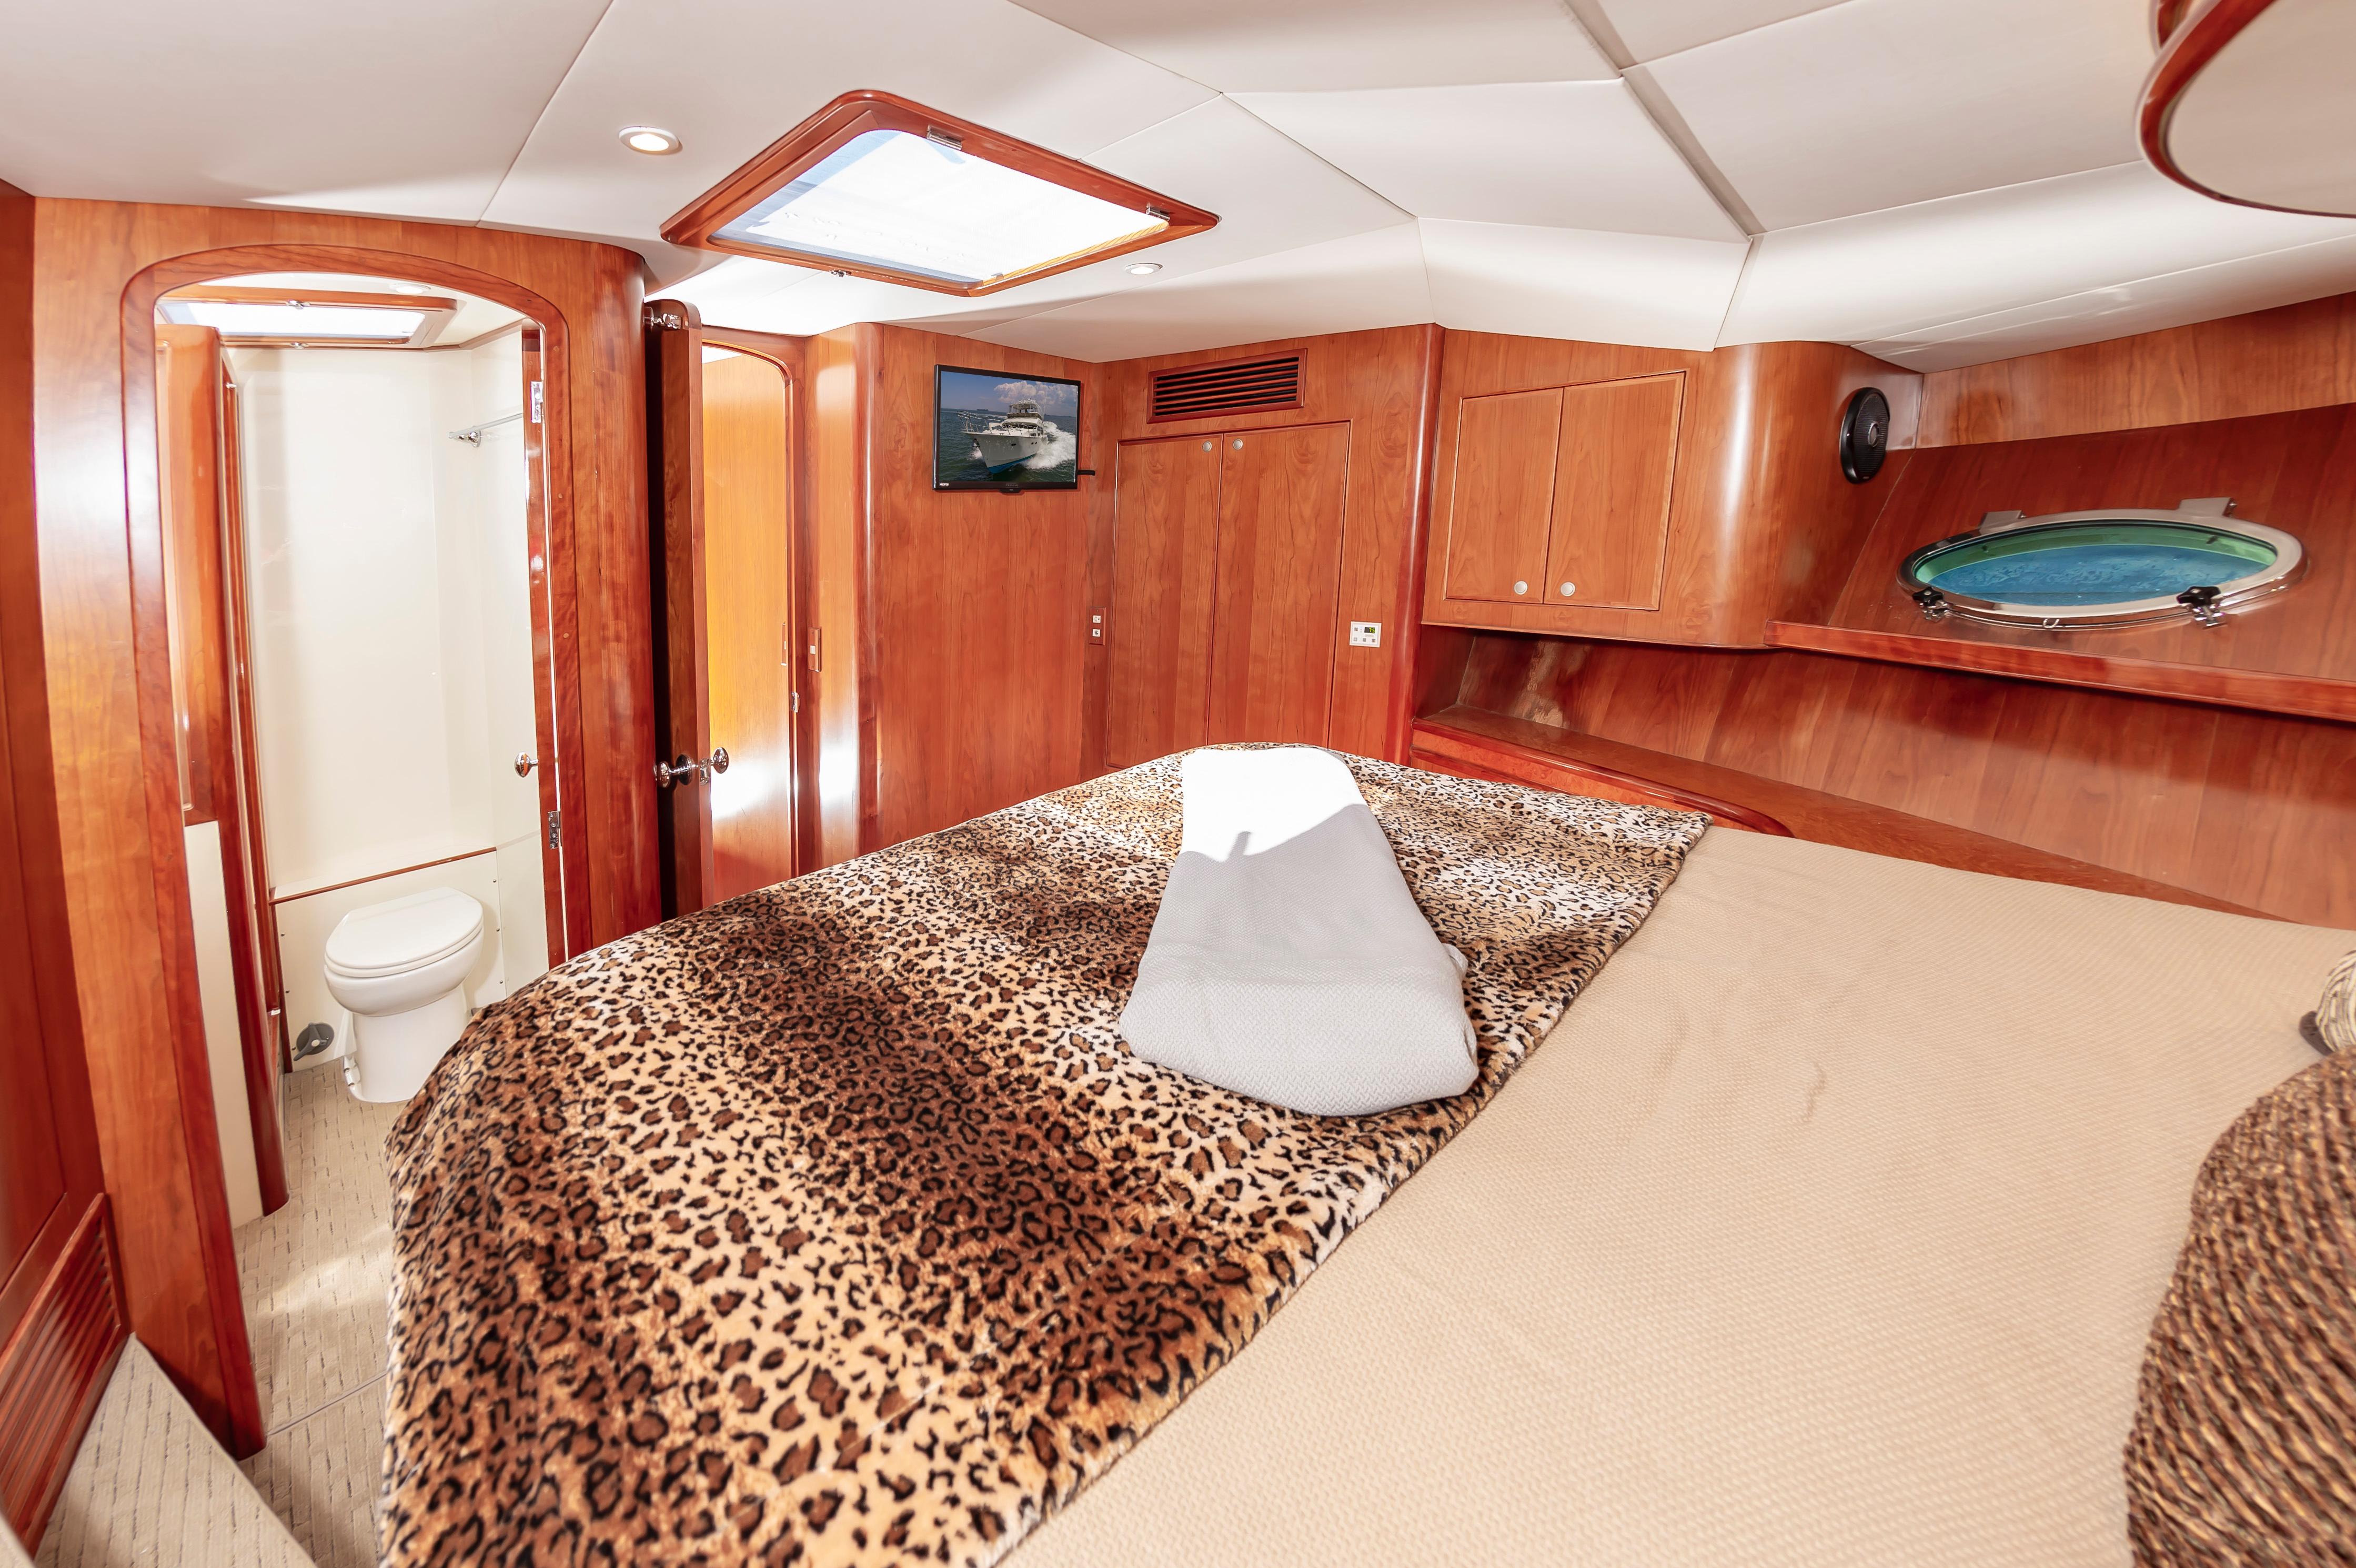 2016 Mikelson 50' S/F, Master Stateroom looking aft